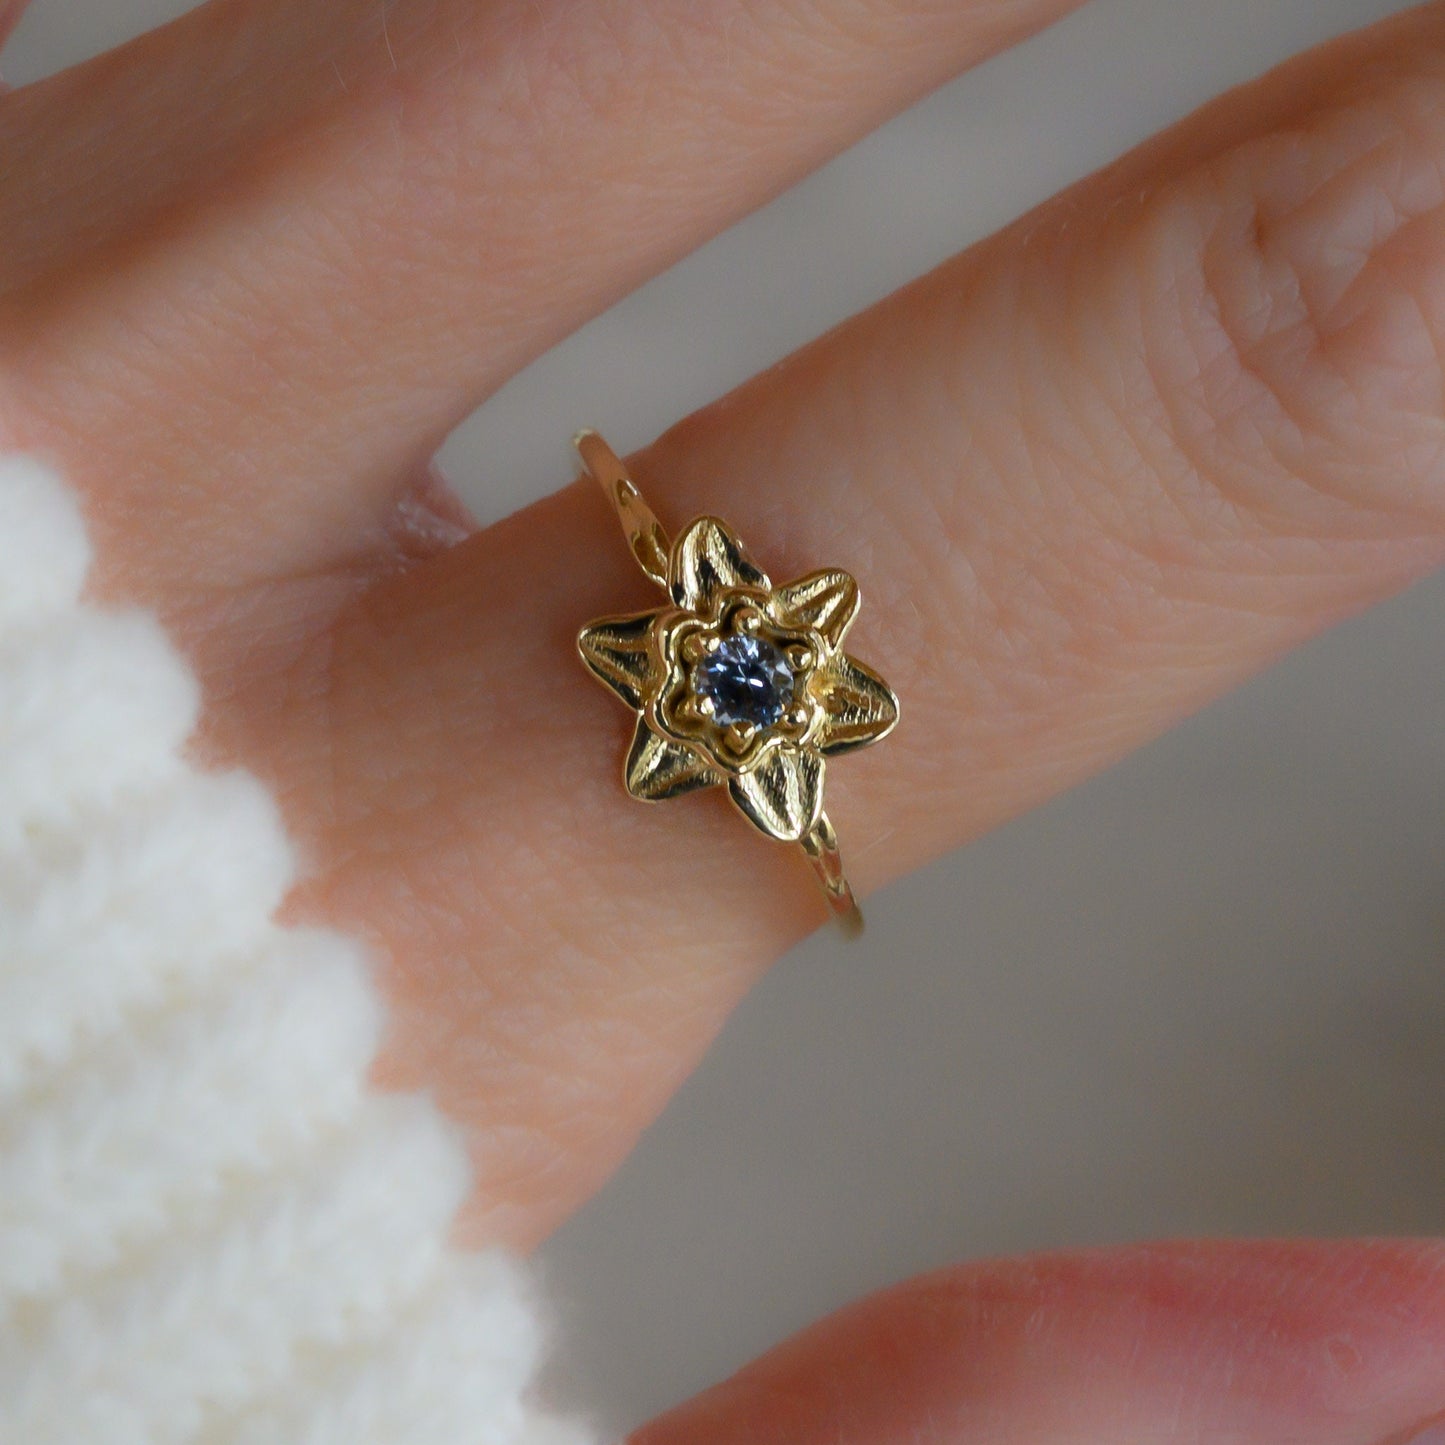 Gift of March Birth Month: Aquamarine Daffodil Ring for New Beginnings, Solid Gold or Silver